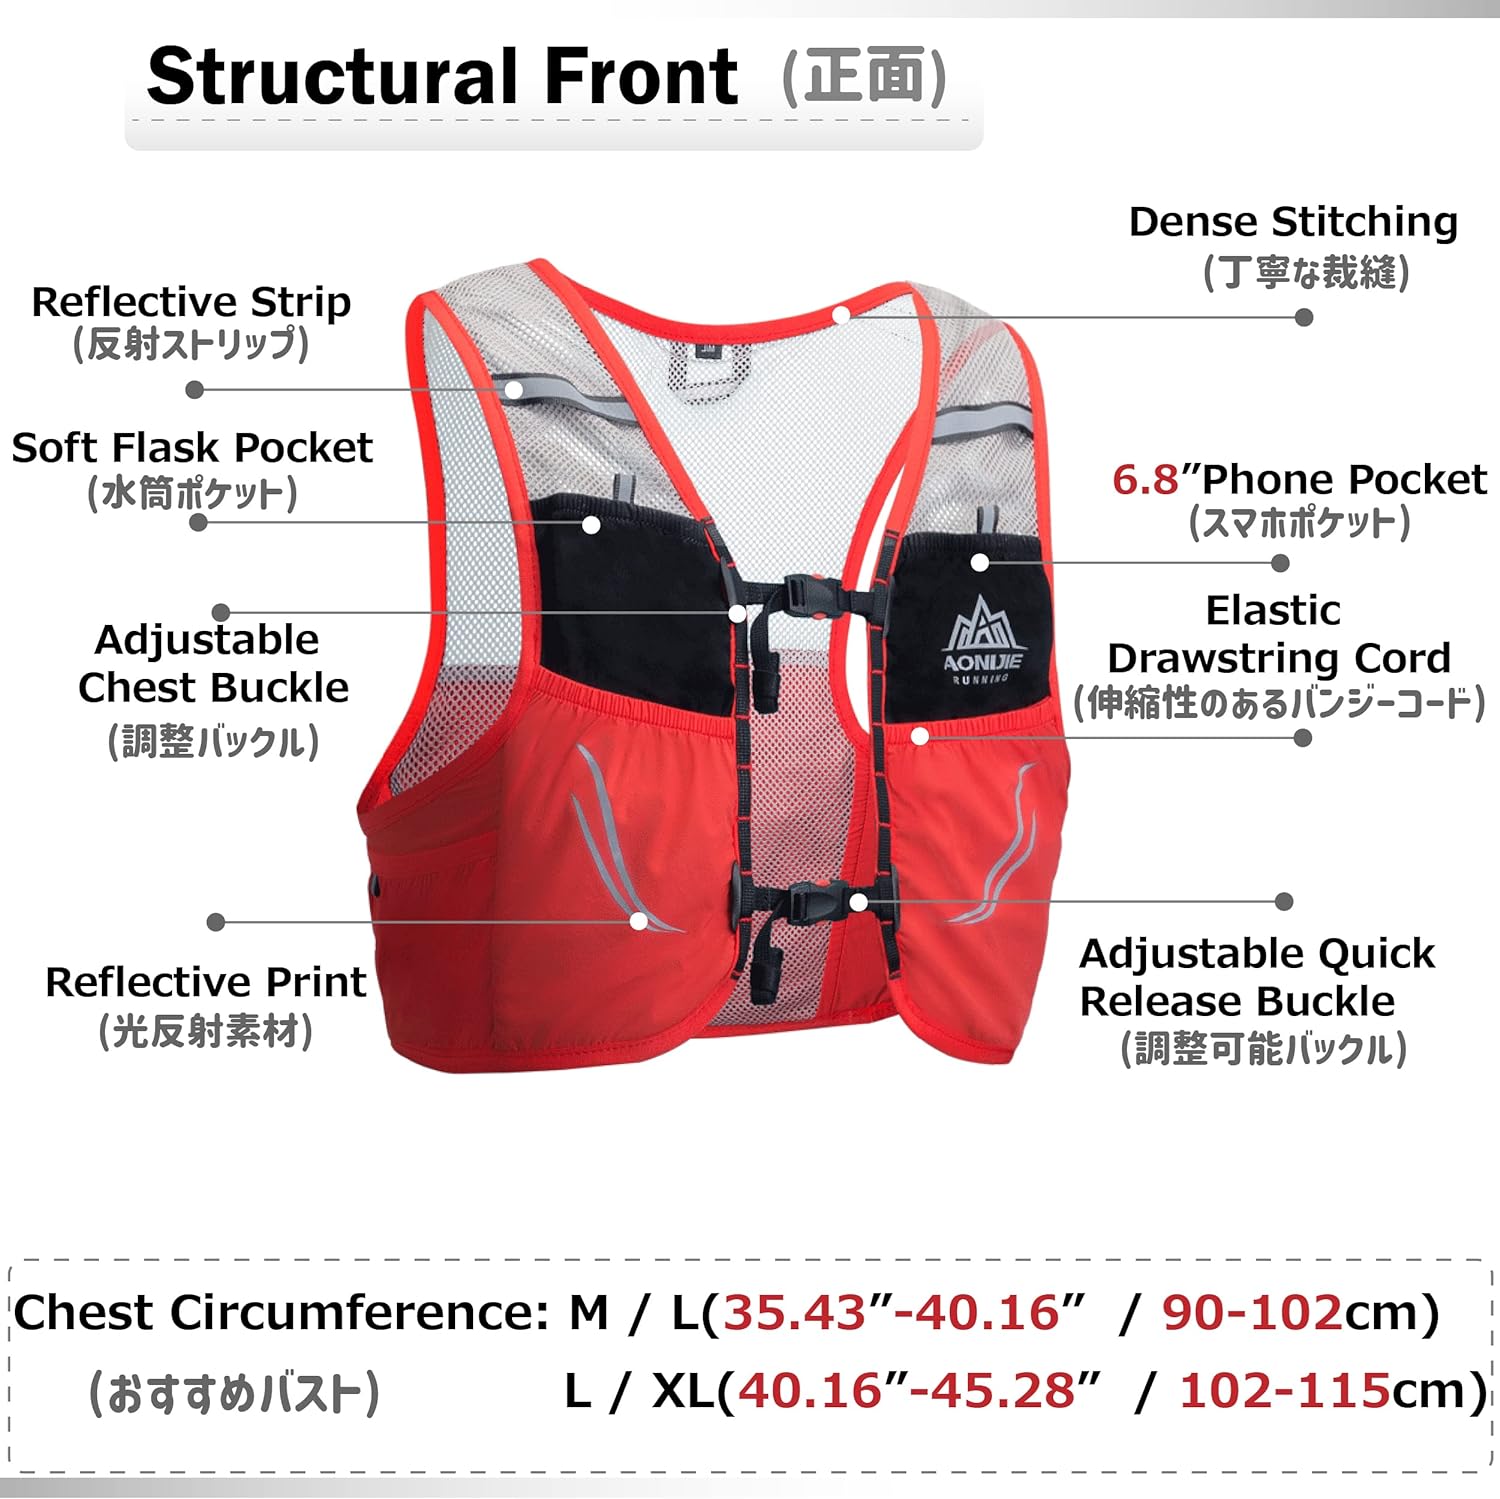 Azarxis 2.5L Hydration Race Vest Pack Lightweight Trail Running Backpack fits for Women & Men for Marathon Jogging Hiking Climbing Outdoor Sports